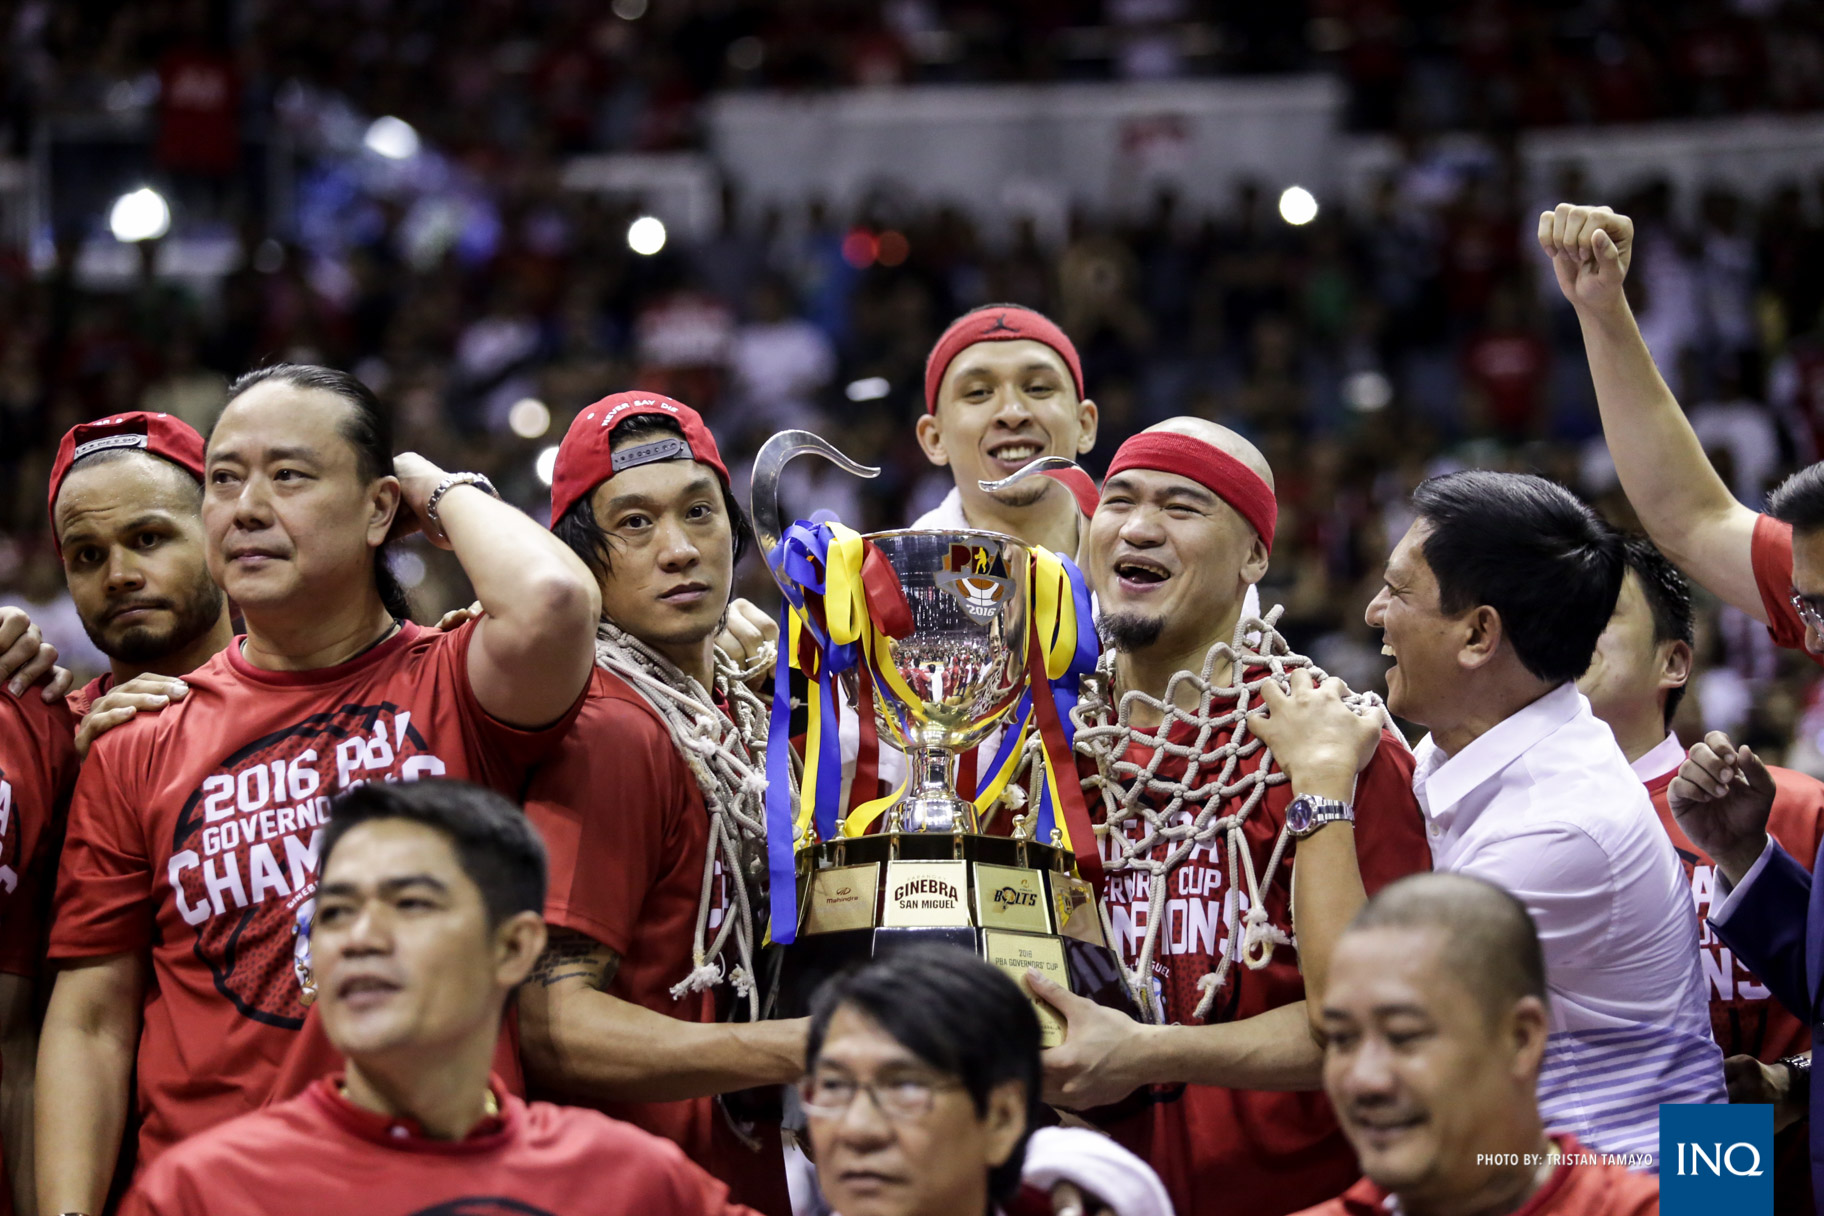 Photo by Tristan Tamayo/INQUIRER.net